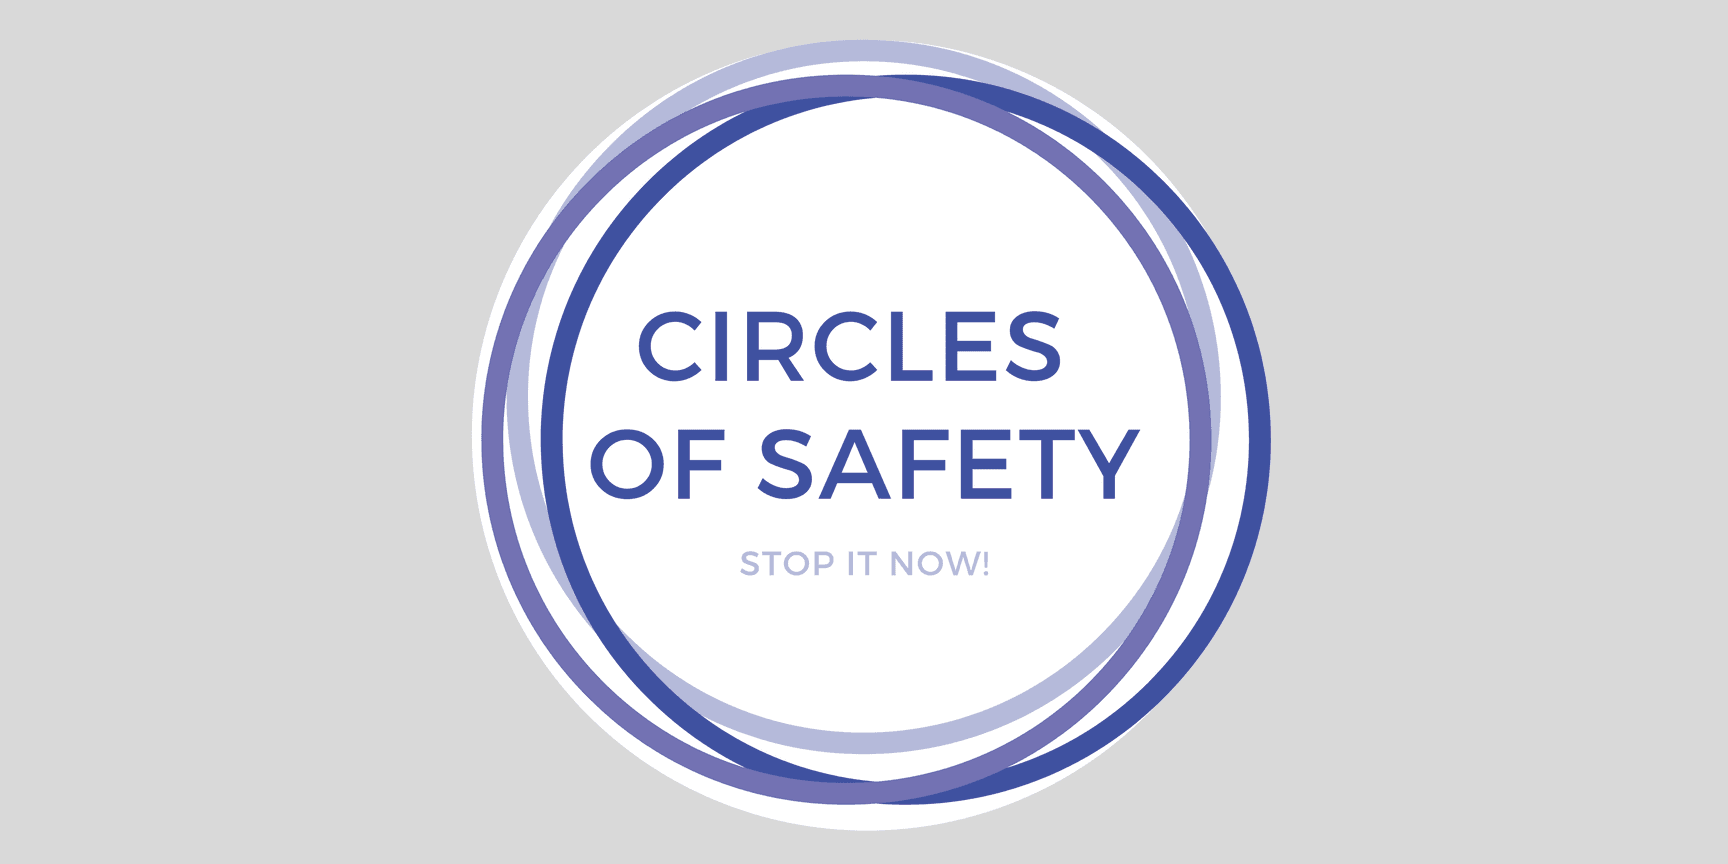 Circles of Safety